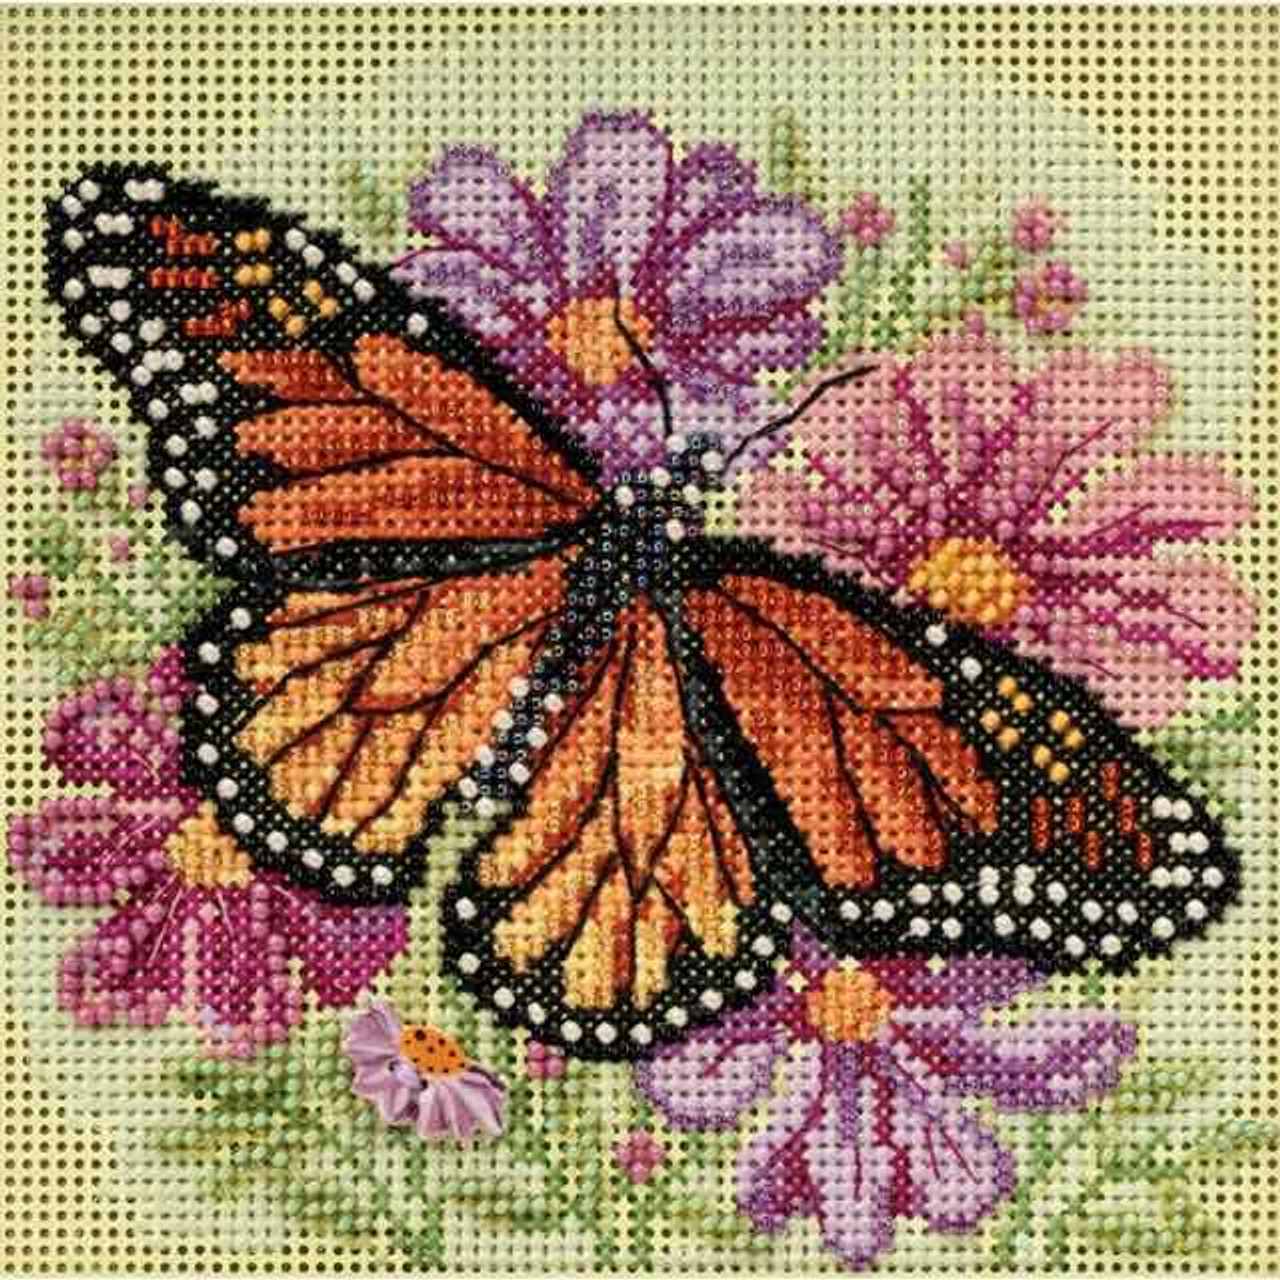 Winged Monarch Beaded Kit Mill Hill 2015 Buttons & Beads Spring MH145105